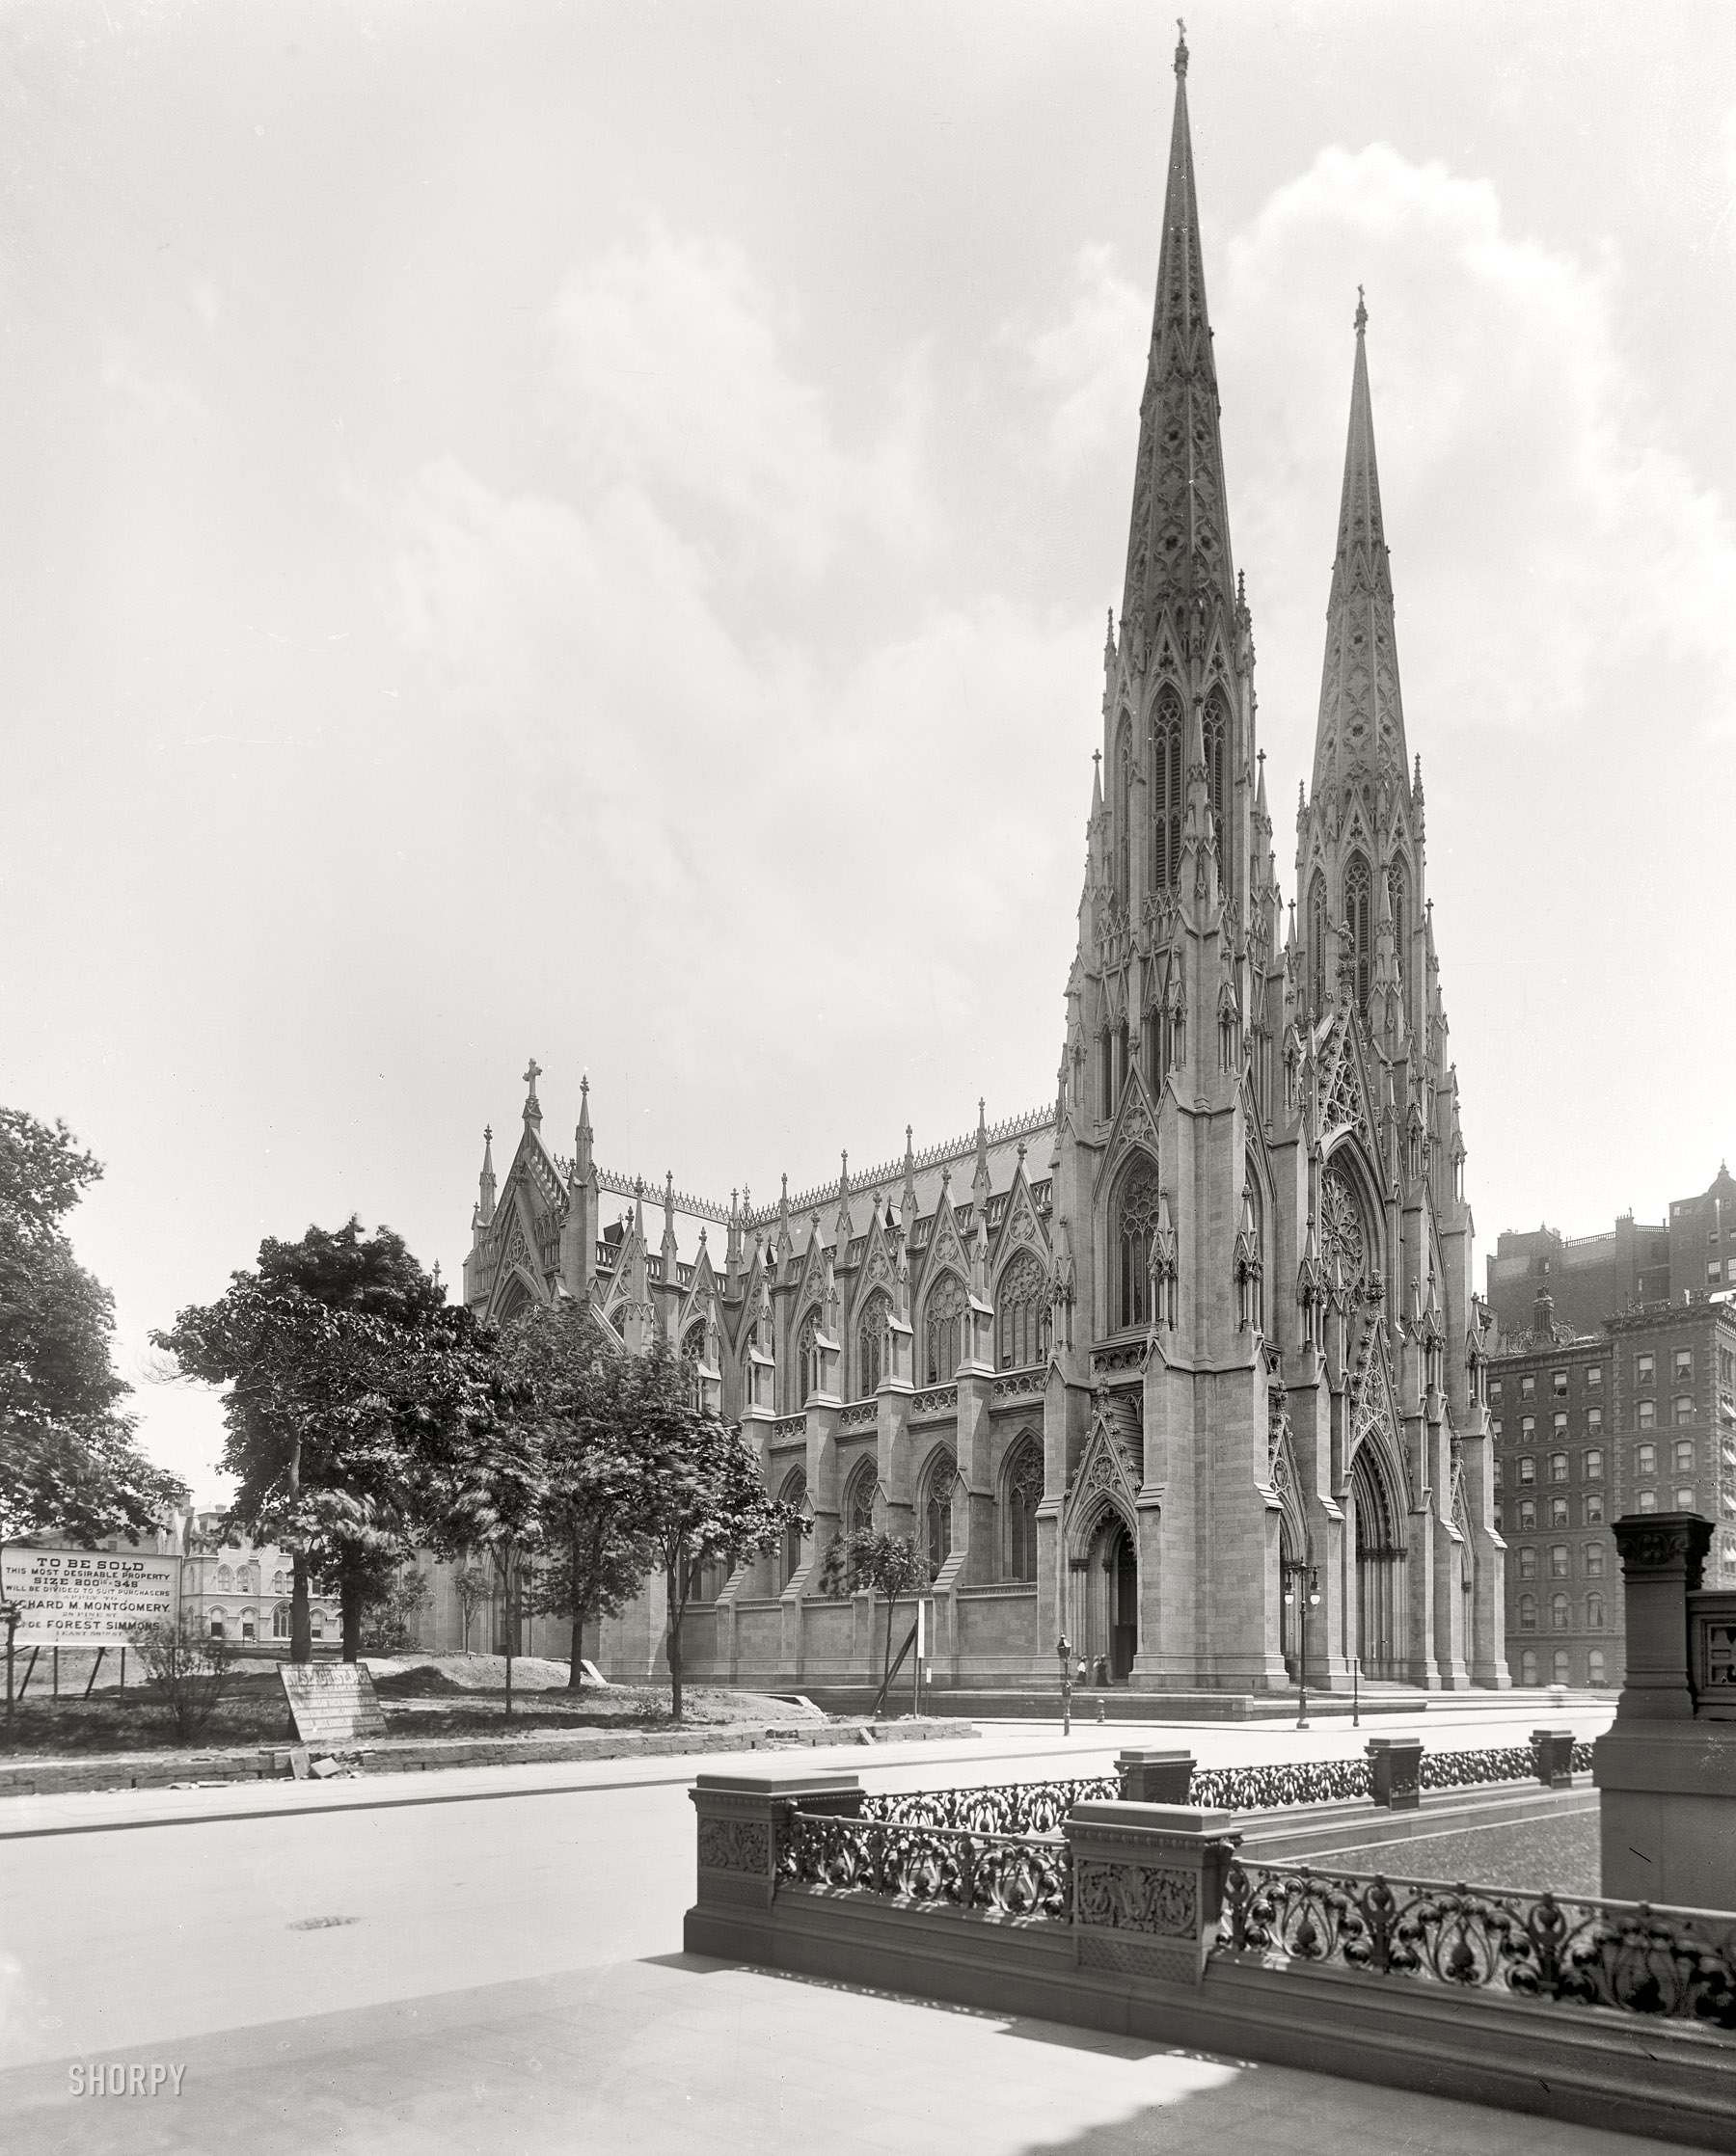 New York circa 1905. "St. Patrick's Cathedral, Fifth Avenue." 8x10 inch dry plate glass negative, Detroit Publishing Company. View full size.